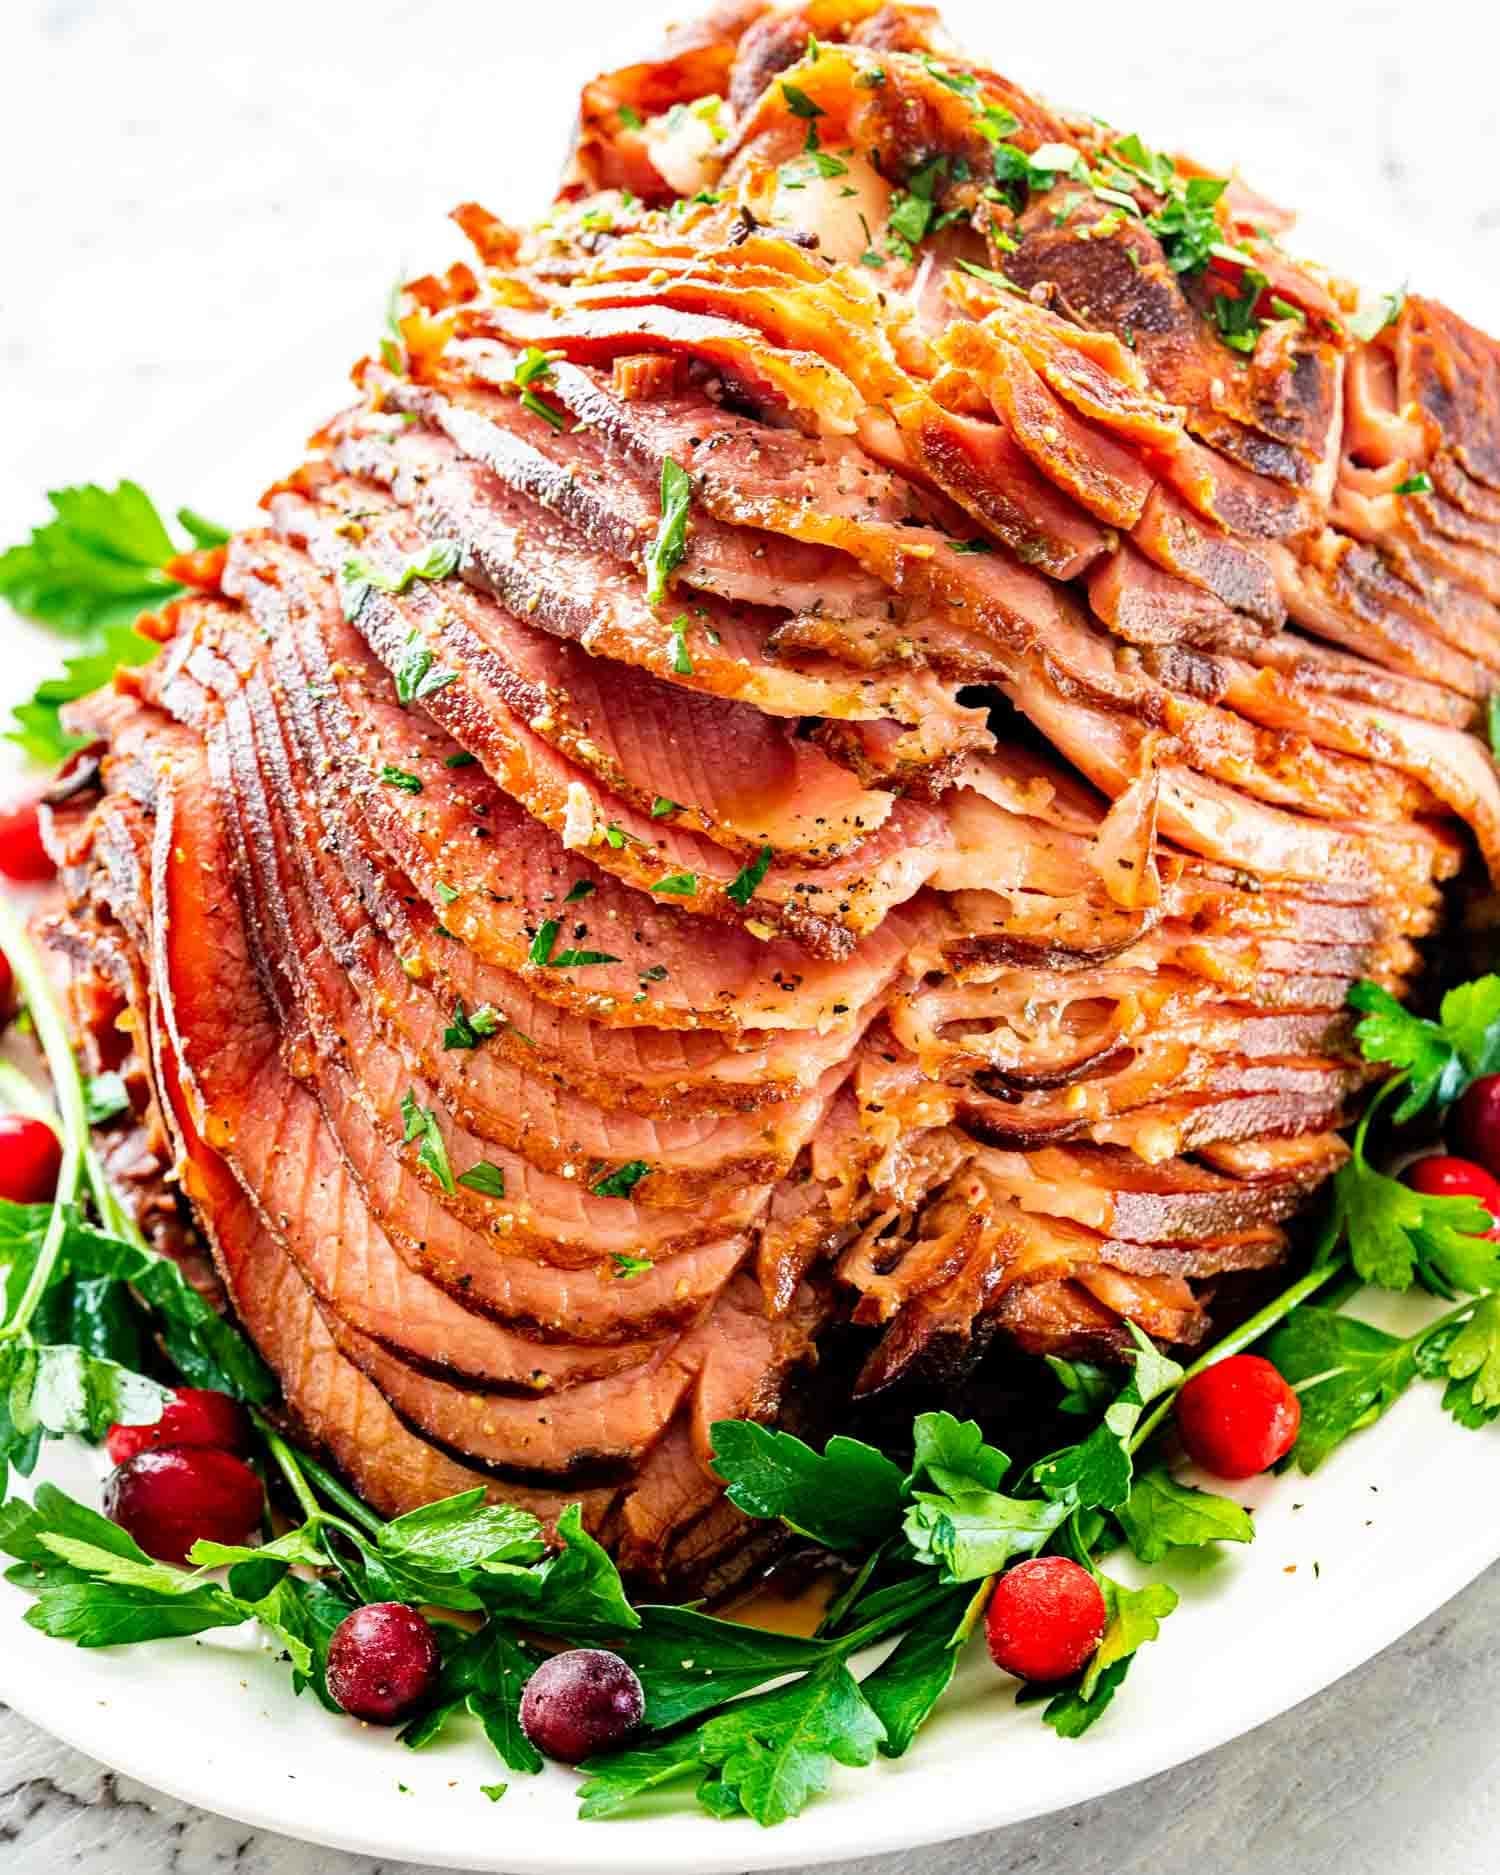 Thinly sliced honey mustard glazed ham garnished with cherries and parsley leaves.